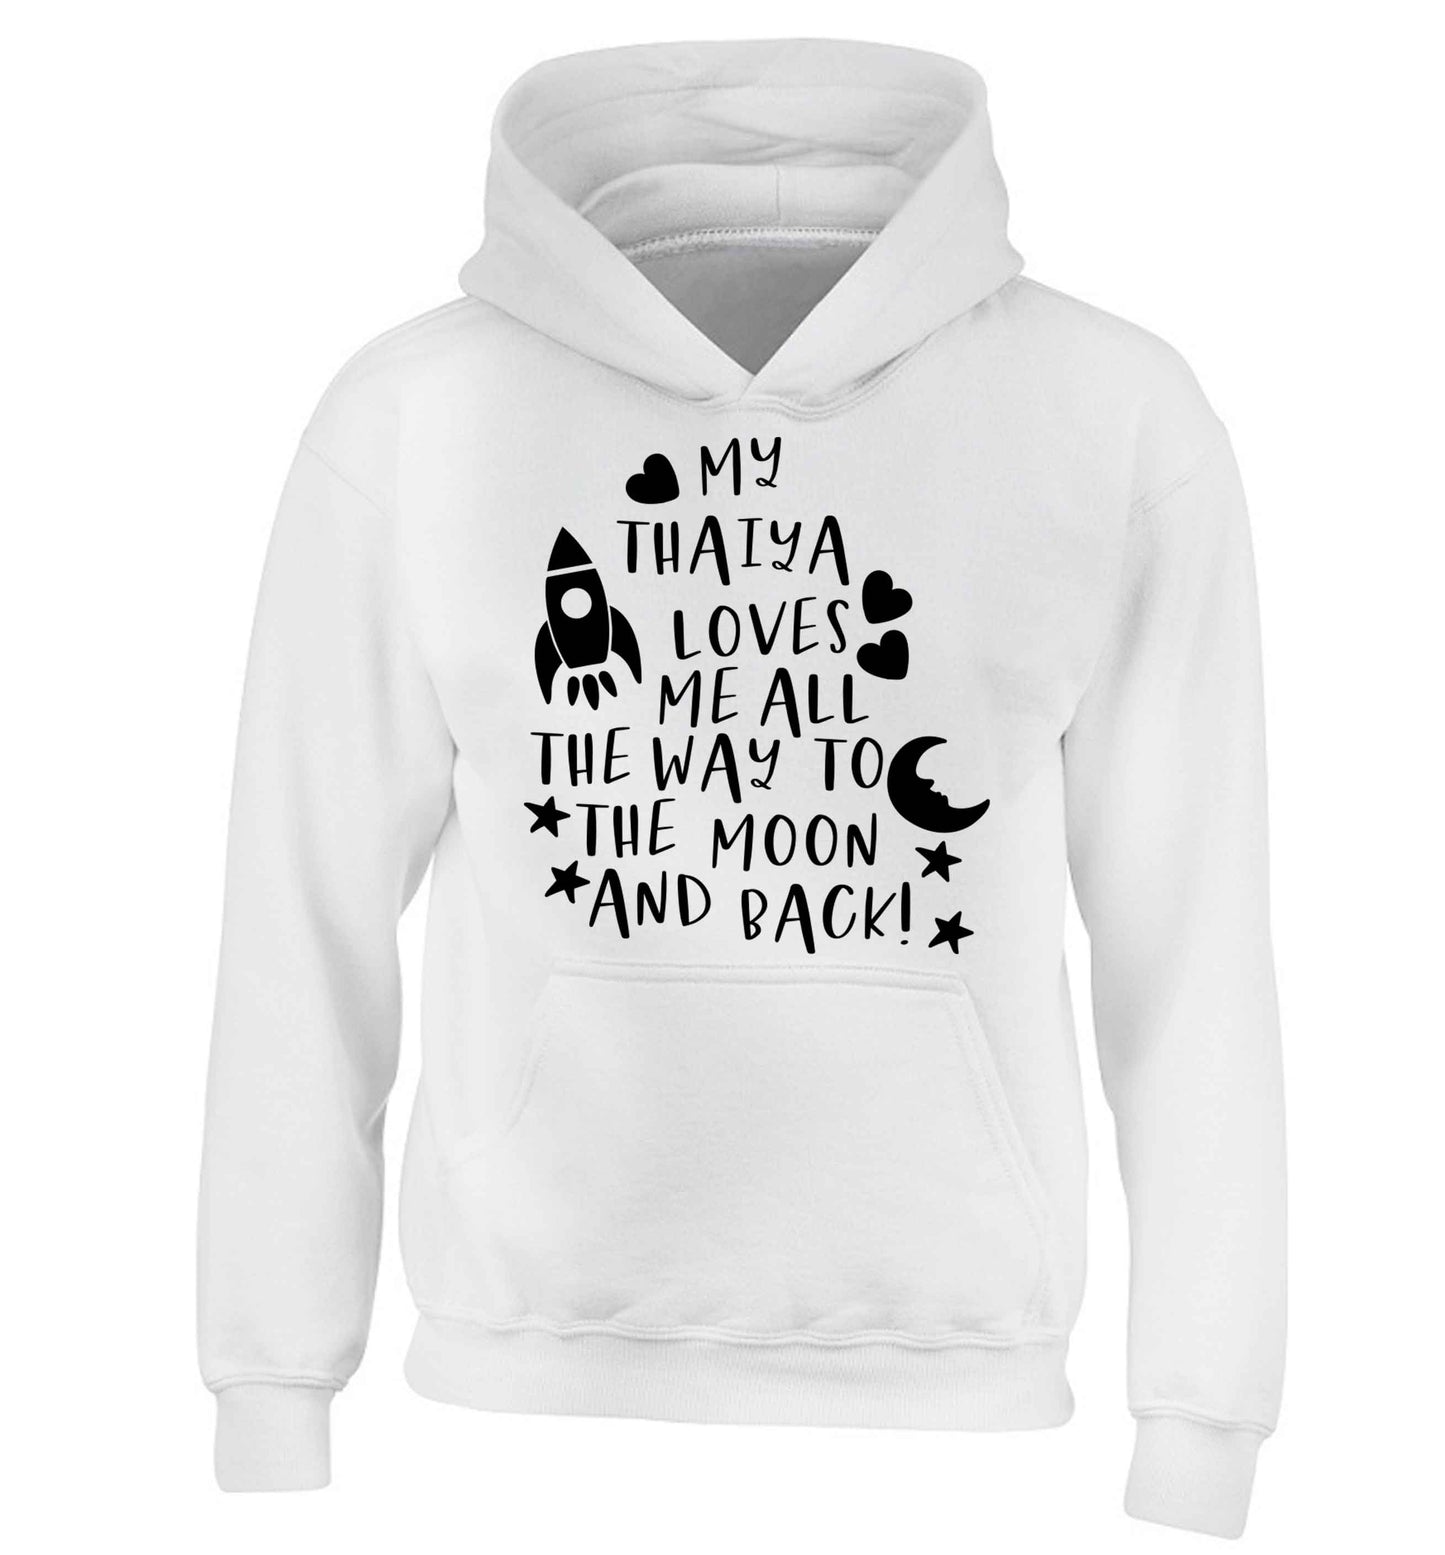 My thaiya loves me all the way to the moon and back children's white hoodie 12-13 Years